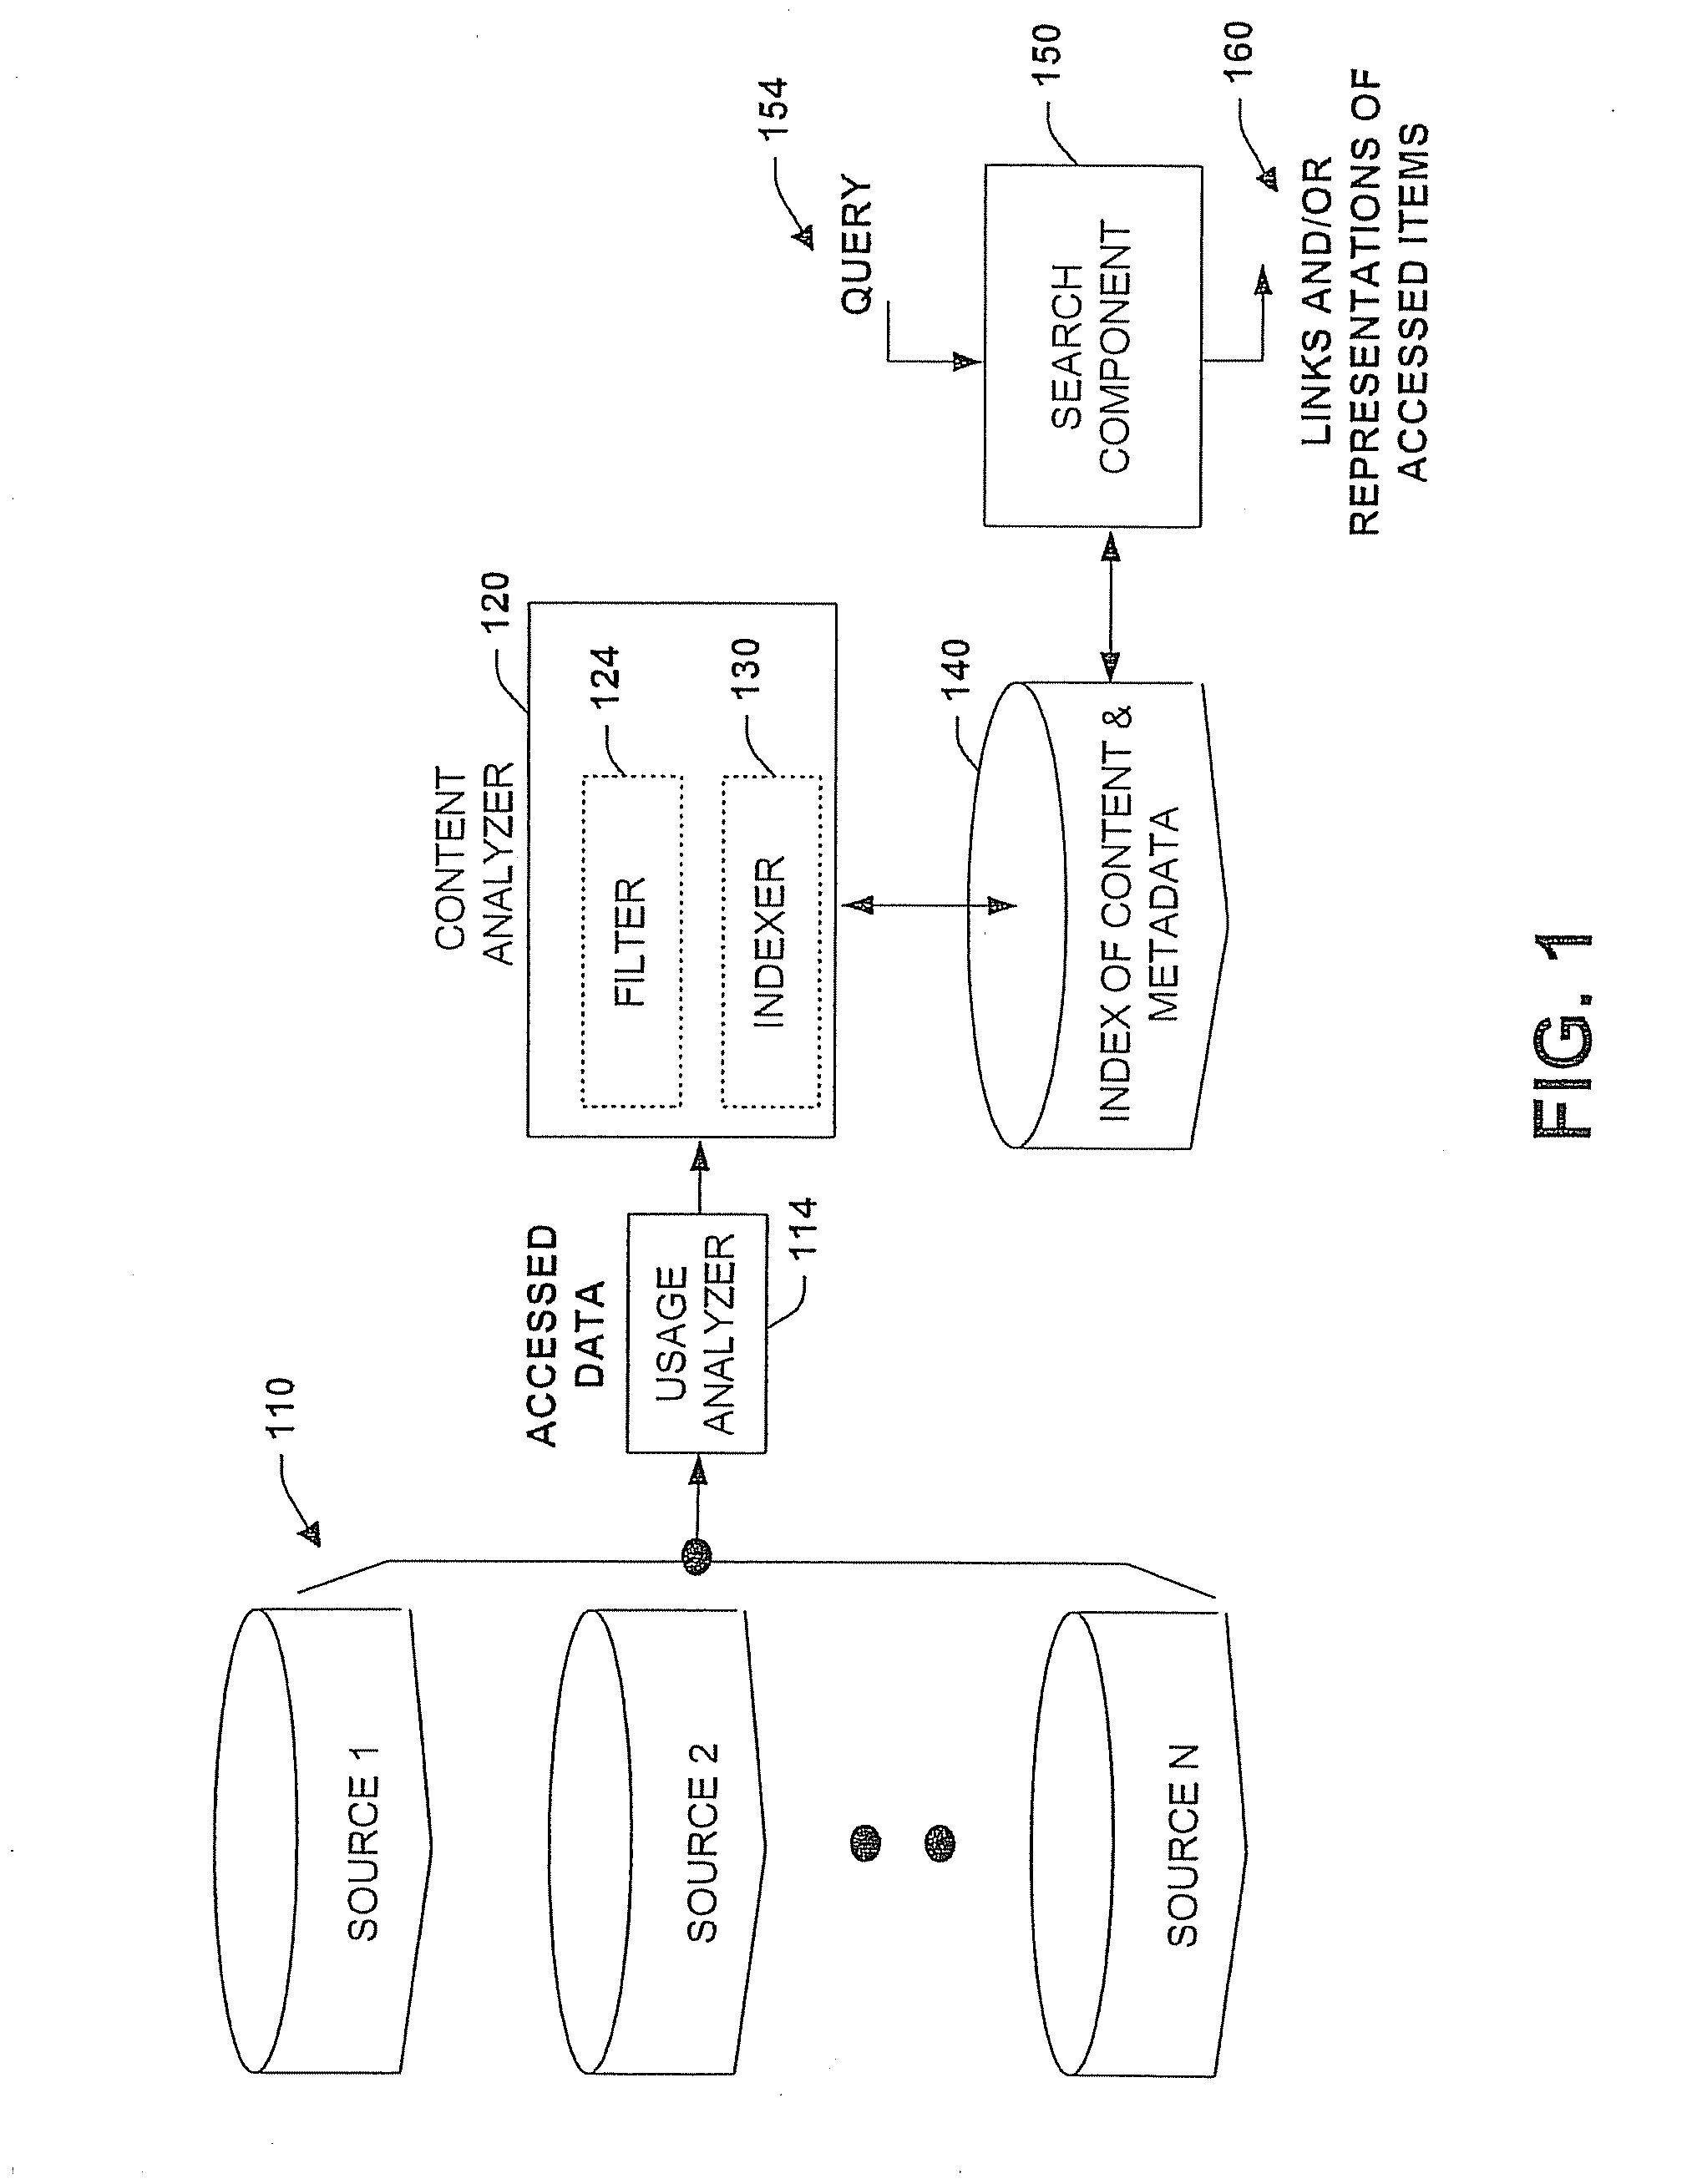 Systems and methods for personal ubiquitous information retrieval and reuse